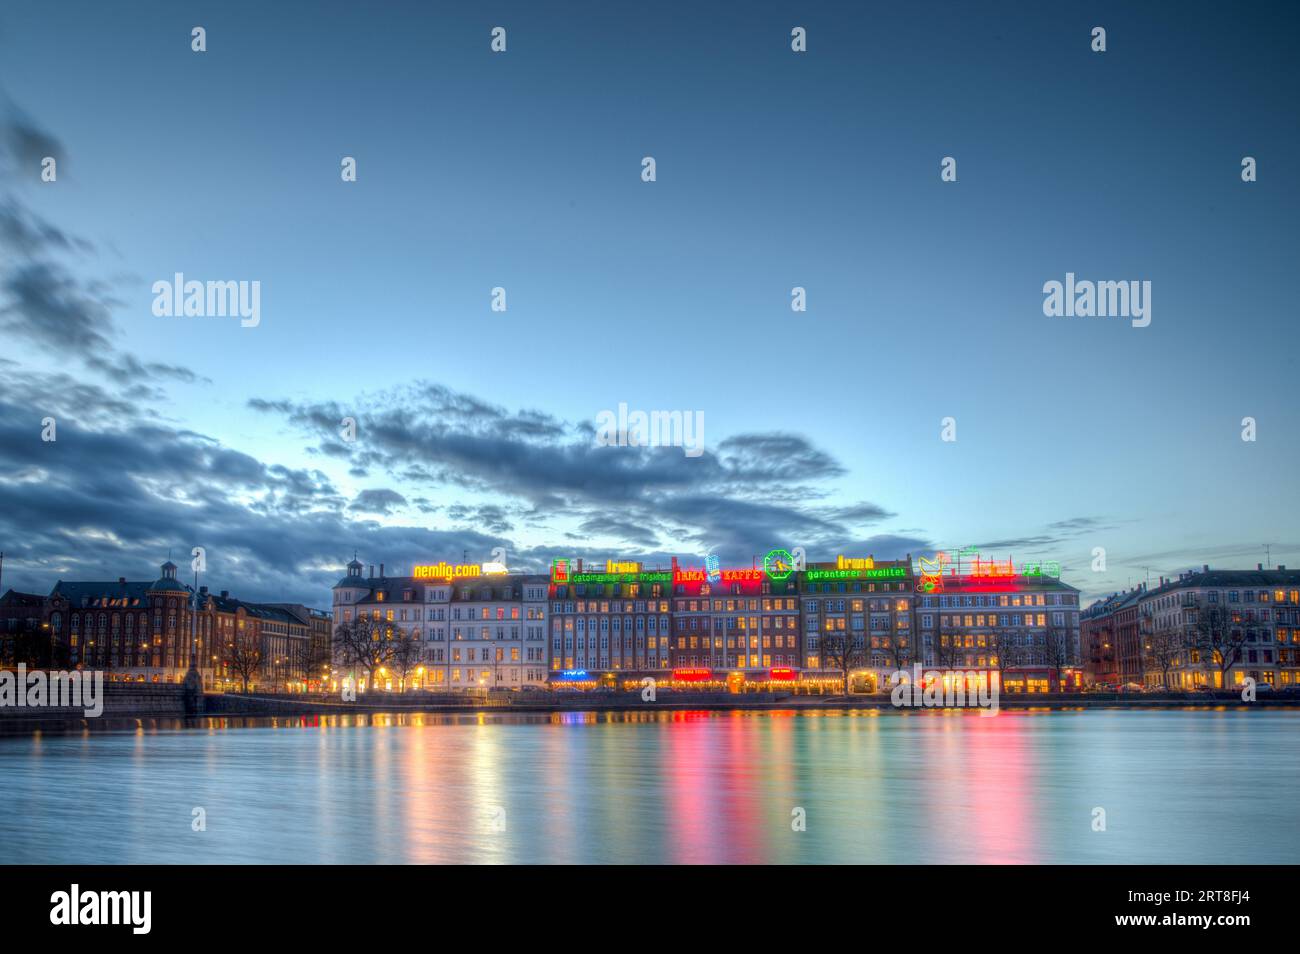 Copenhagen, Denmark, March 2, 2017: Evening view over the Lakes with the famous illuminated advertisement signs on buildings Stock Photo